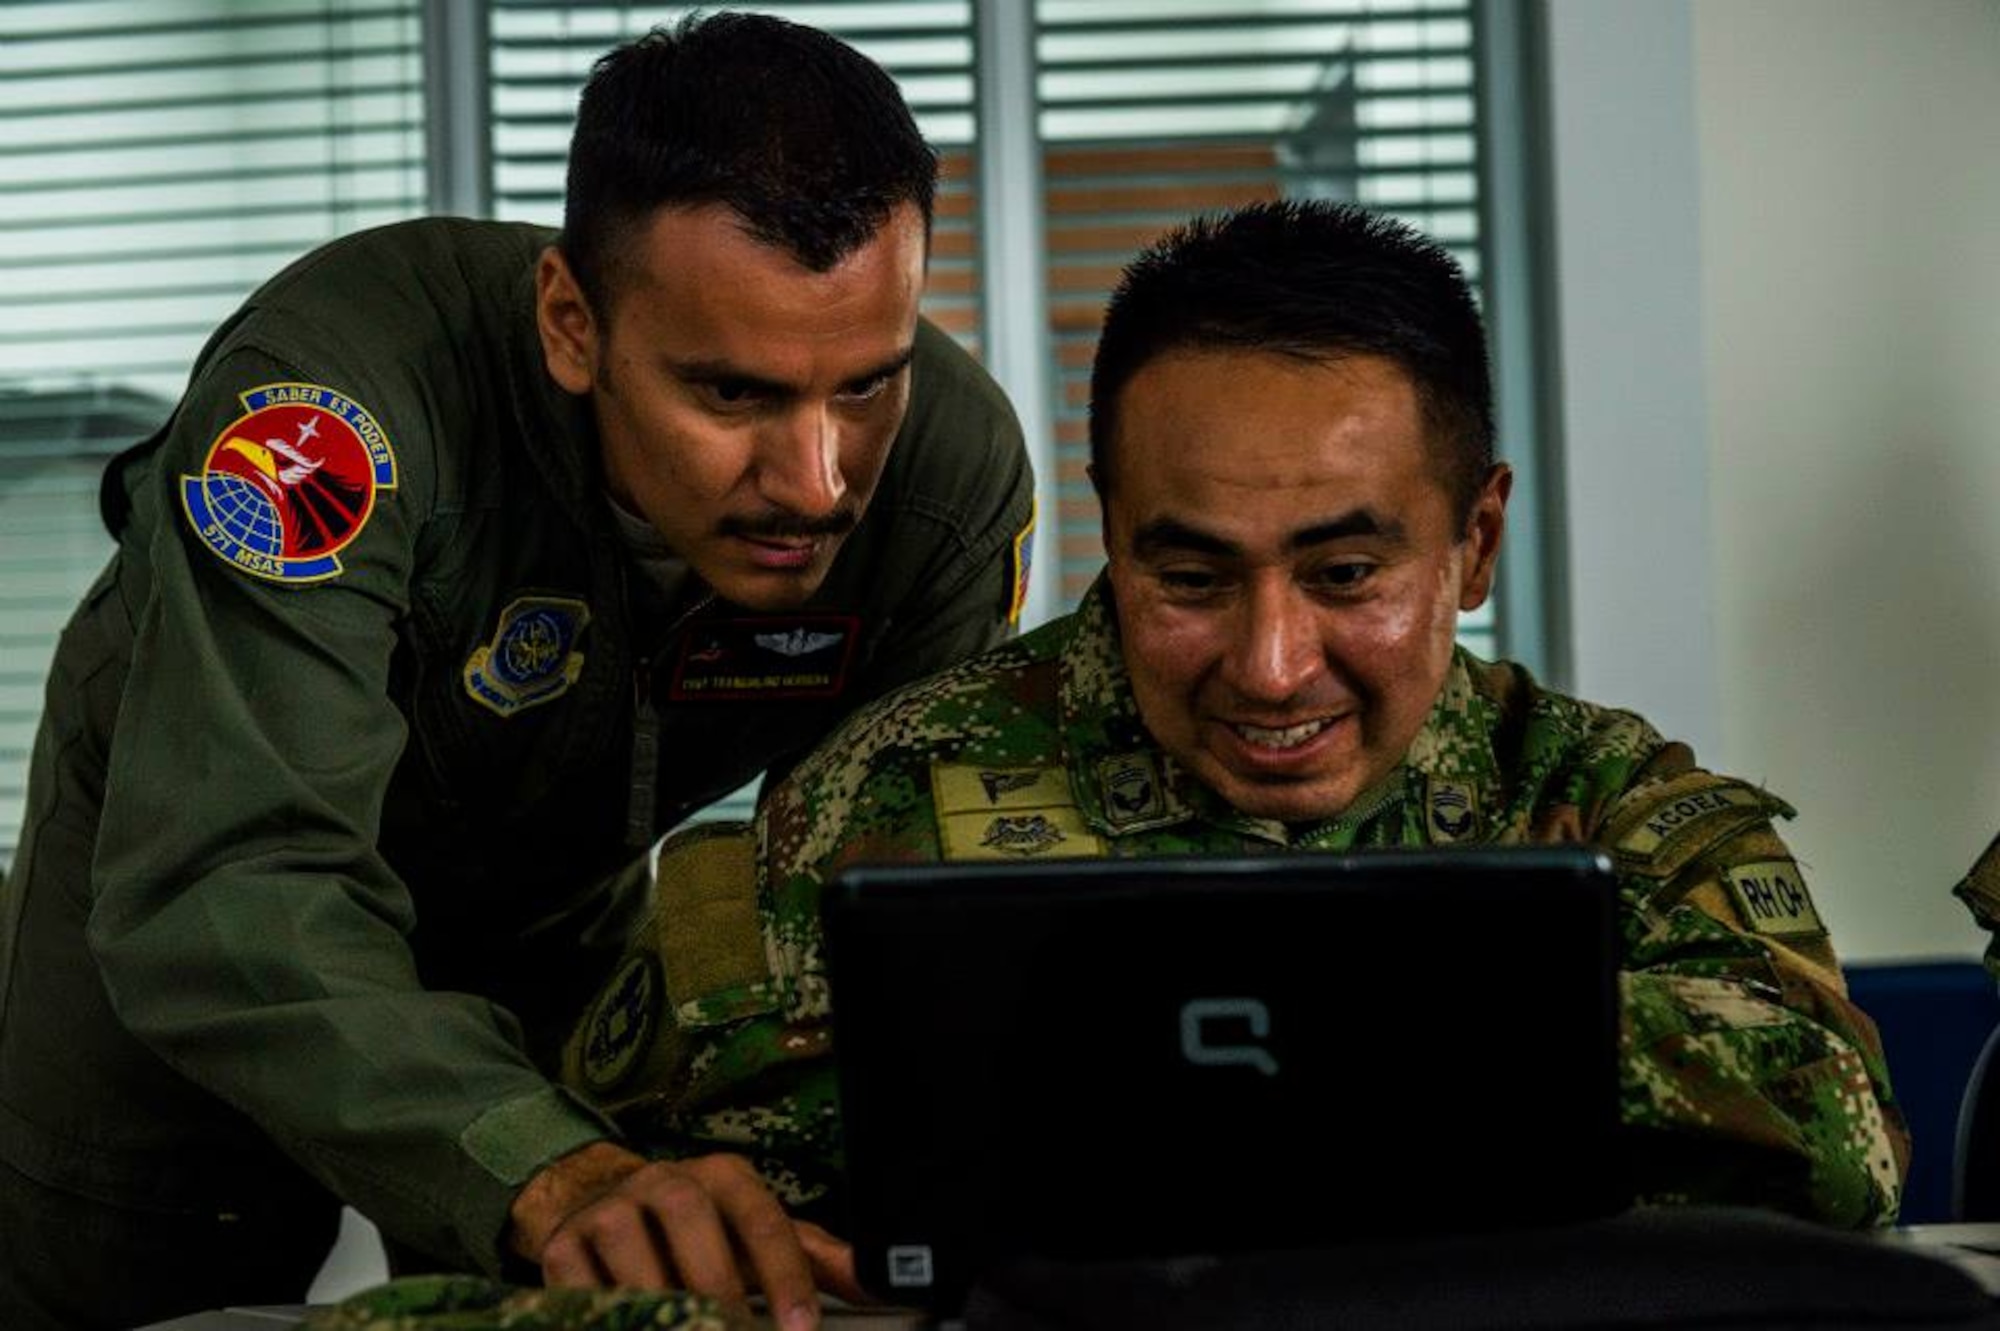 Tech. Sgt. Tranquilino Herrera, a loadmaster Air Advisor for the 571st Mobility Support Advisory Squadron, assist Colombian Air Force airmen Tecnico Primero Camilo Andres Rey with preparing a rigging checklist for the first air drop with United States Air Force personnel aboard on March 2, 2015 at CATAM Air Force Base, Colombia in South America. (Photo by U.S. Air Force Tech. Sgt. Matthew Hannen)